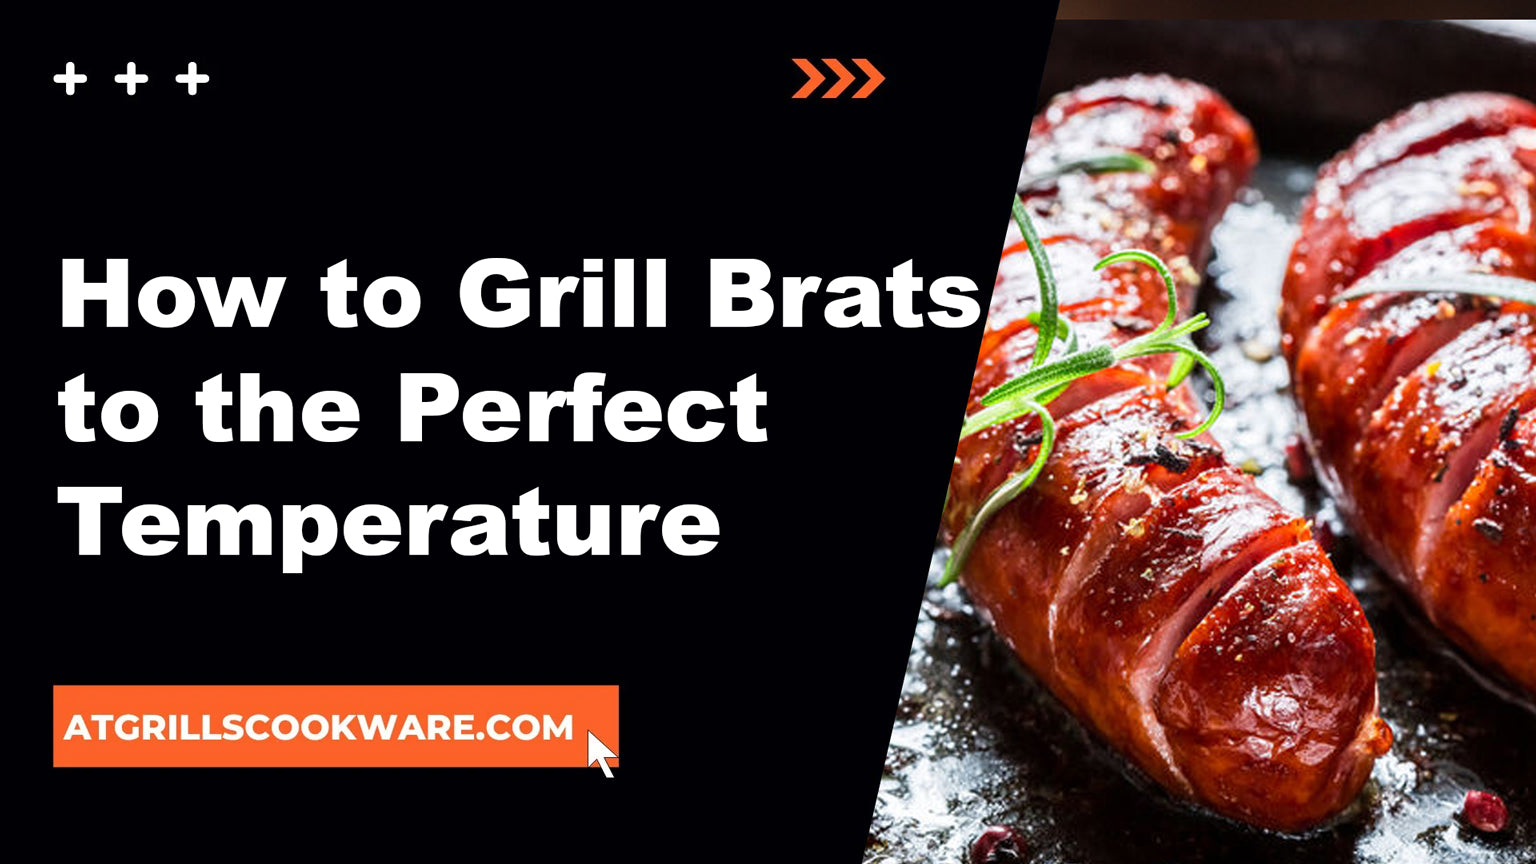 Grilling to Perfection: Master the Art of Bratwurst Preparation